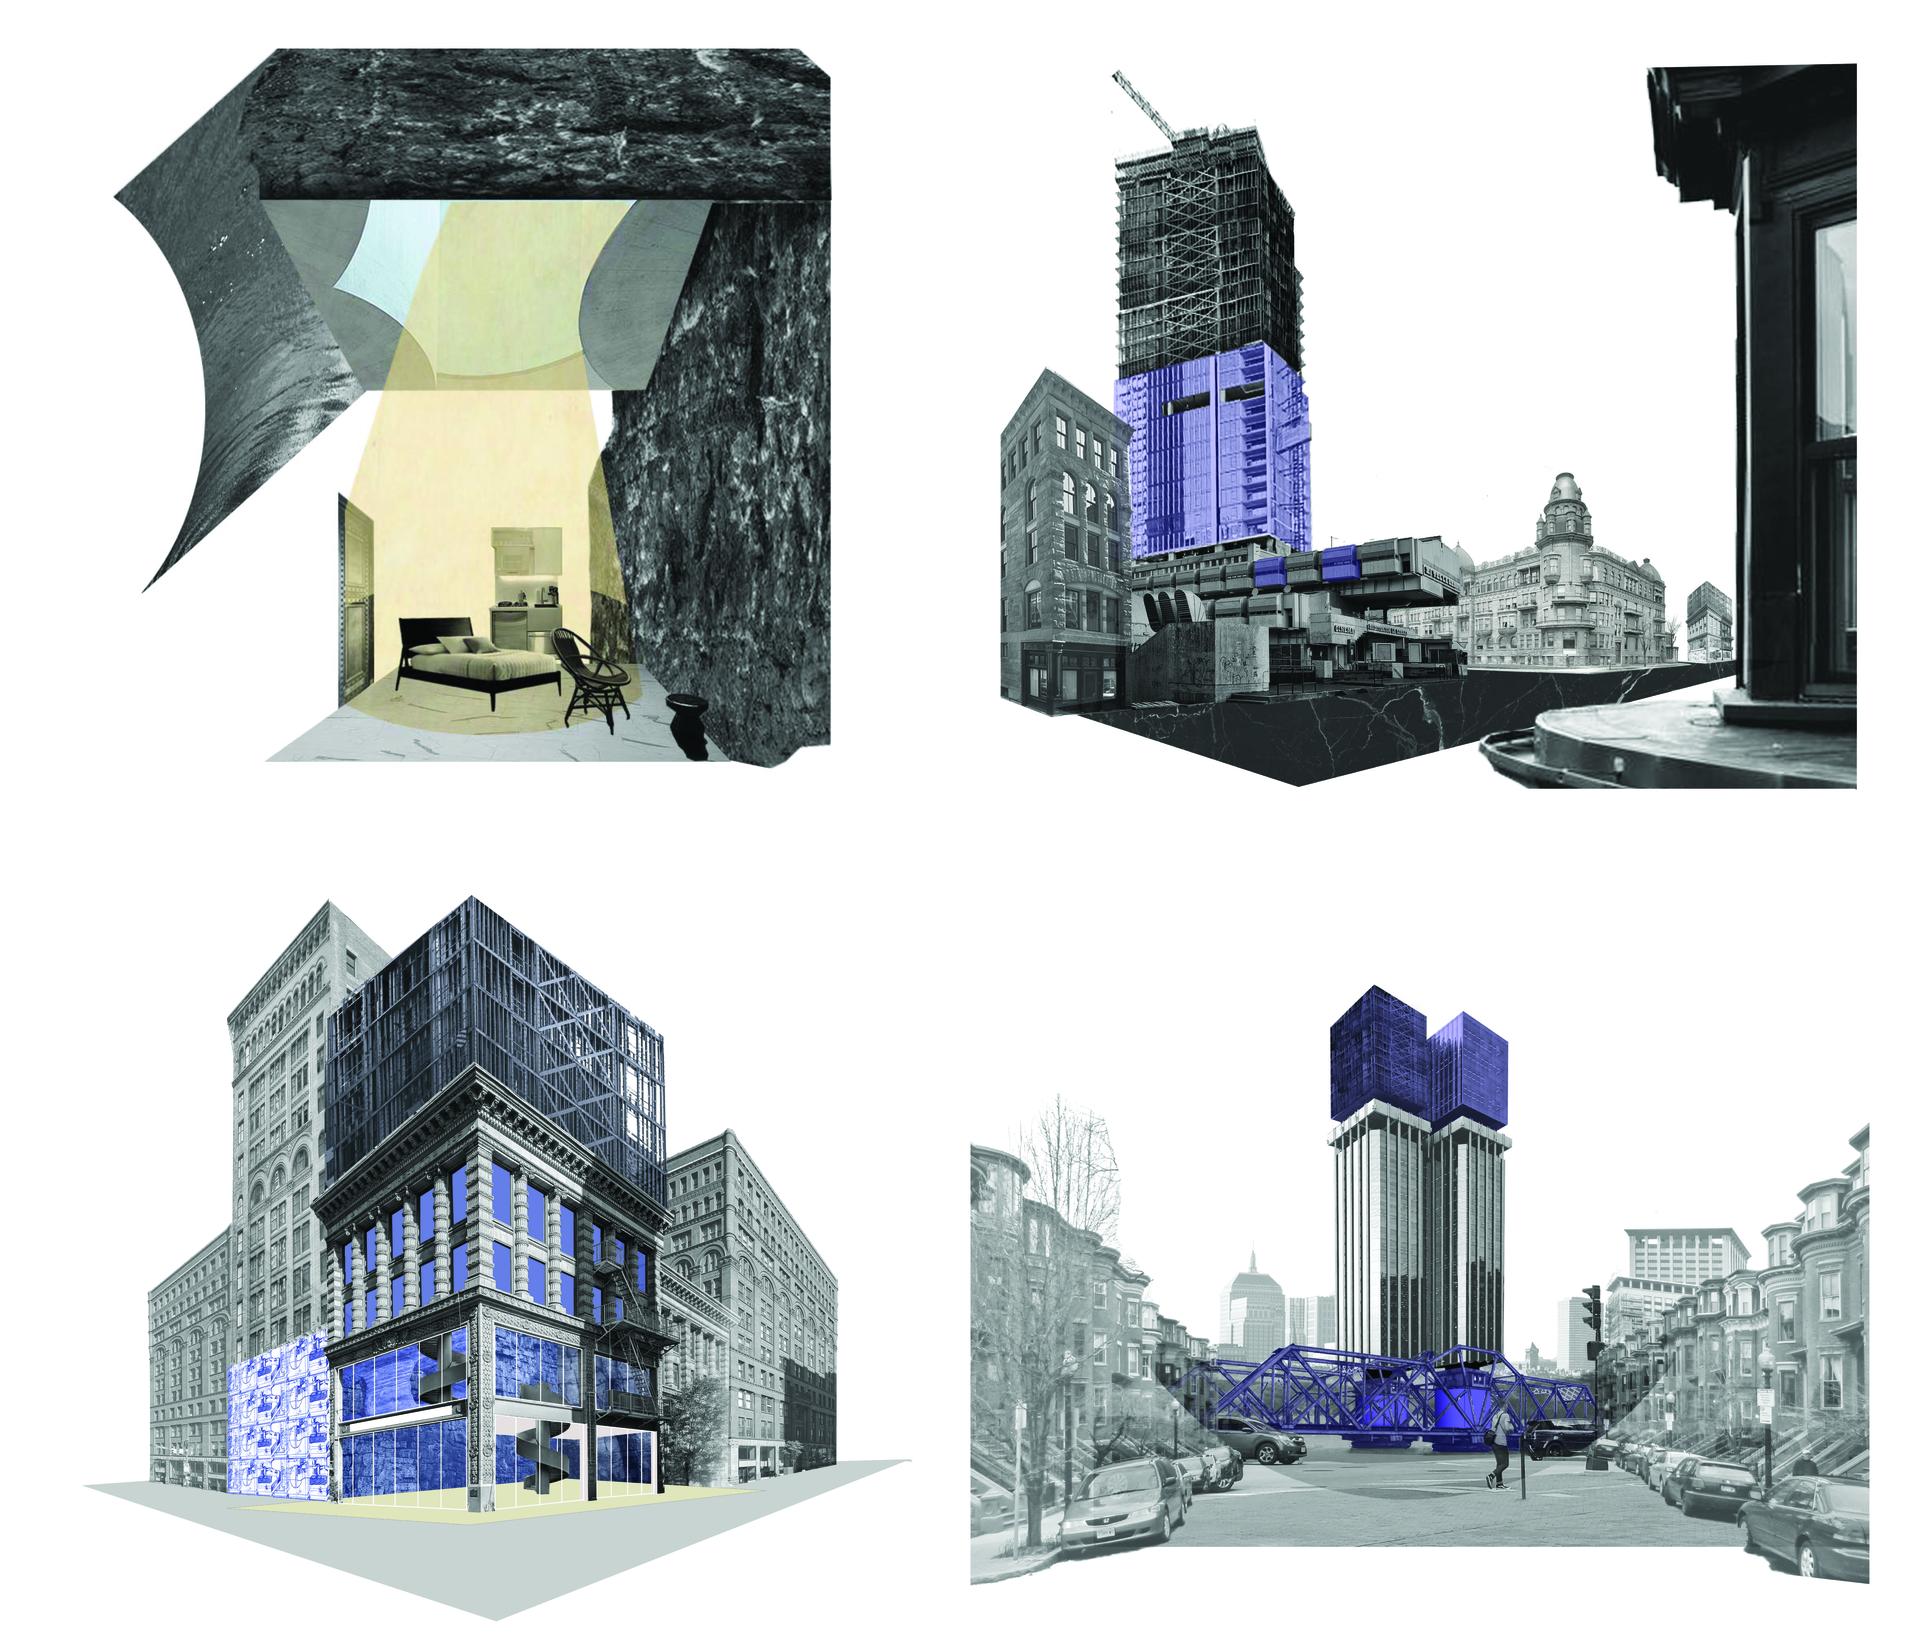 4 collages combined into a singular image on a 2x2 grid, black and white buildings with purple accents.